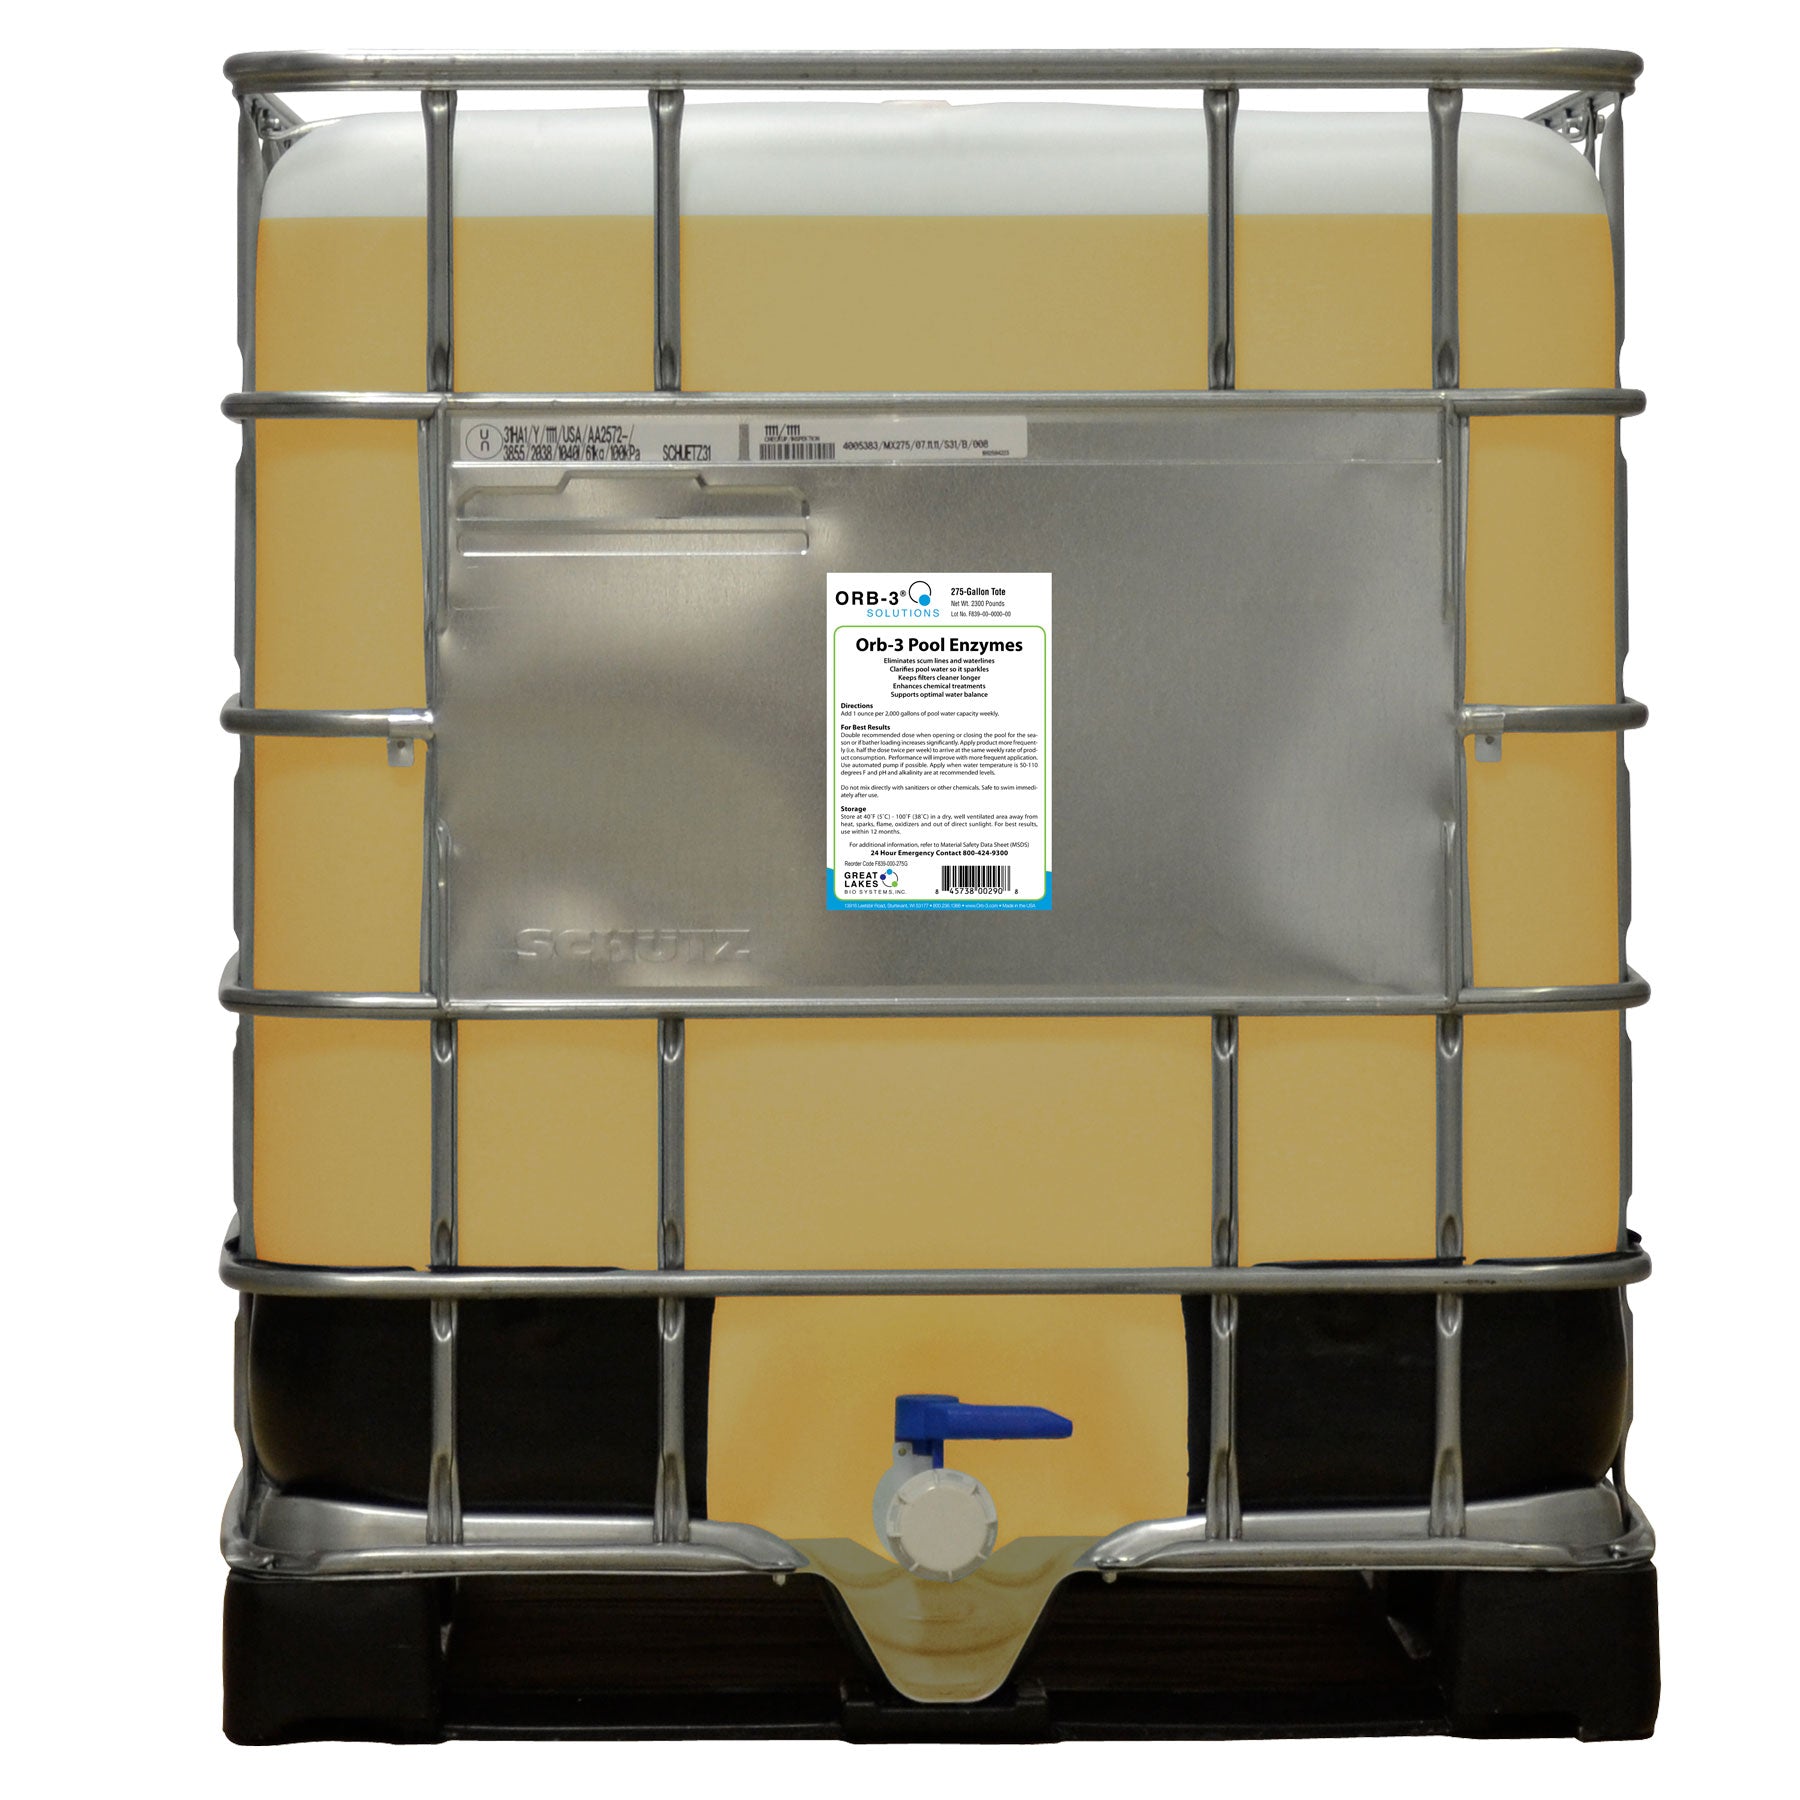 Orb-3 Pool Enzymes in a 275 Gallon Tote